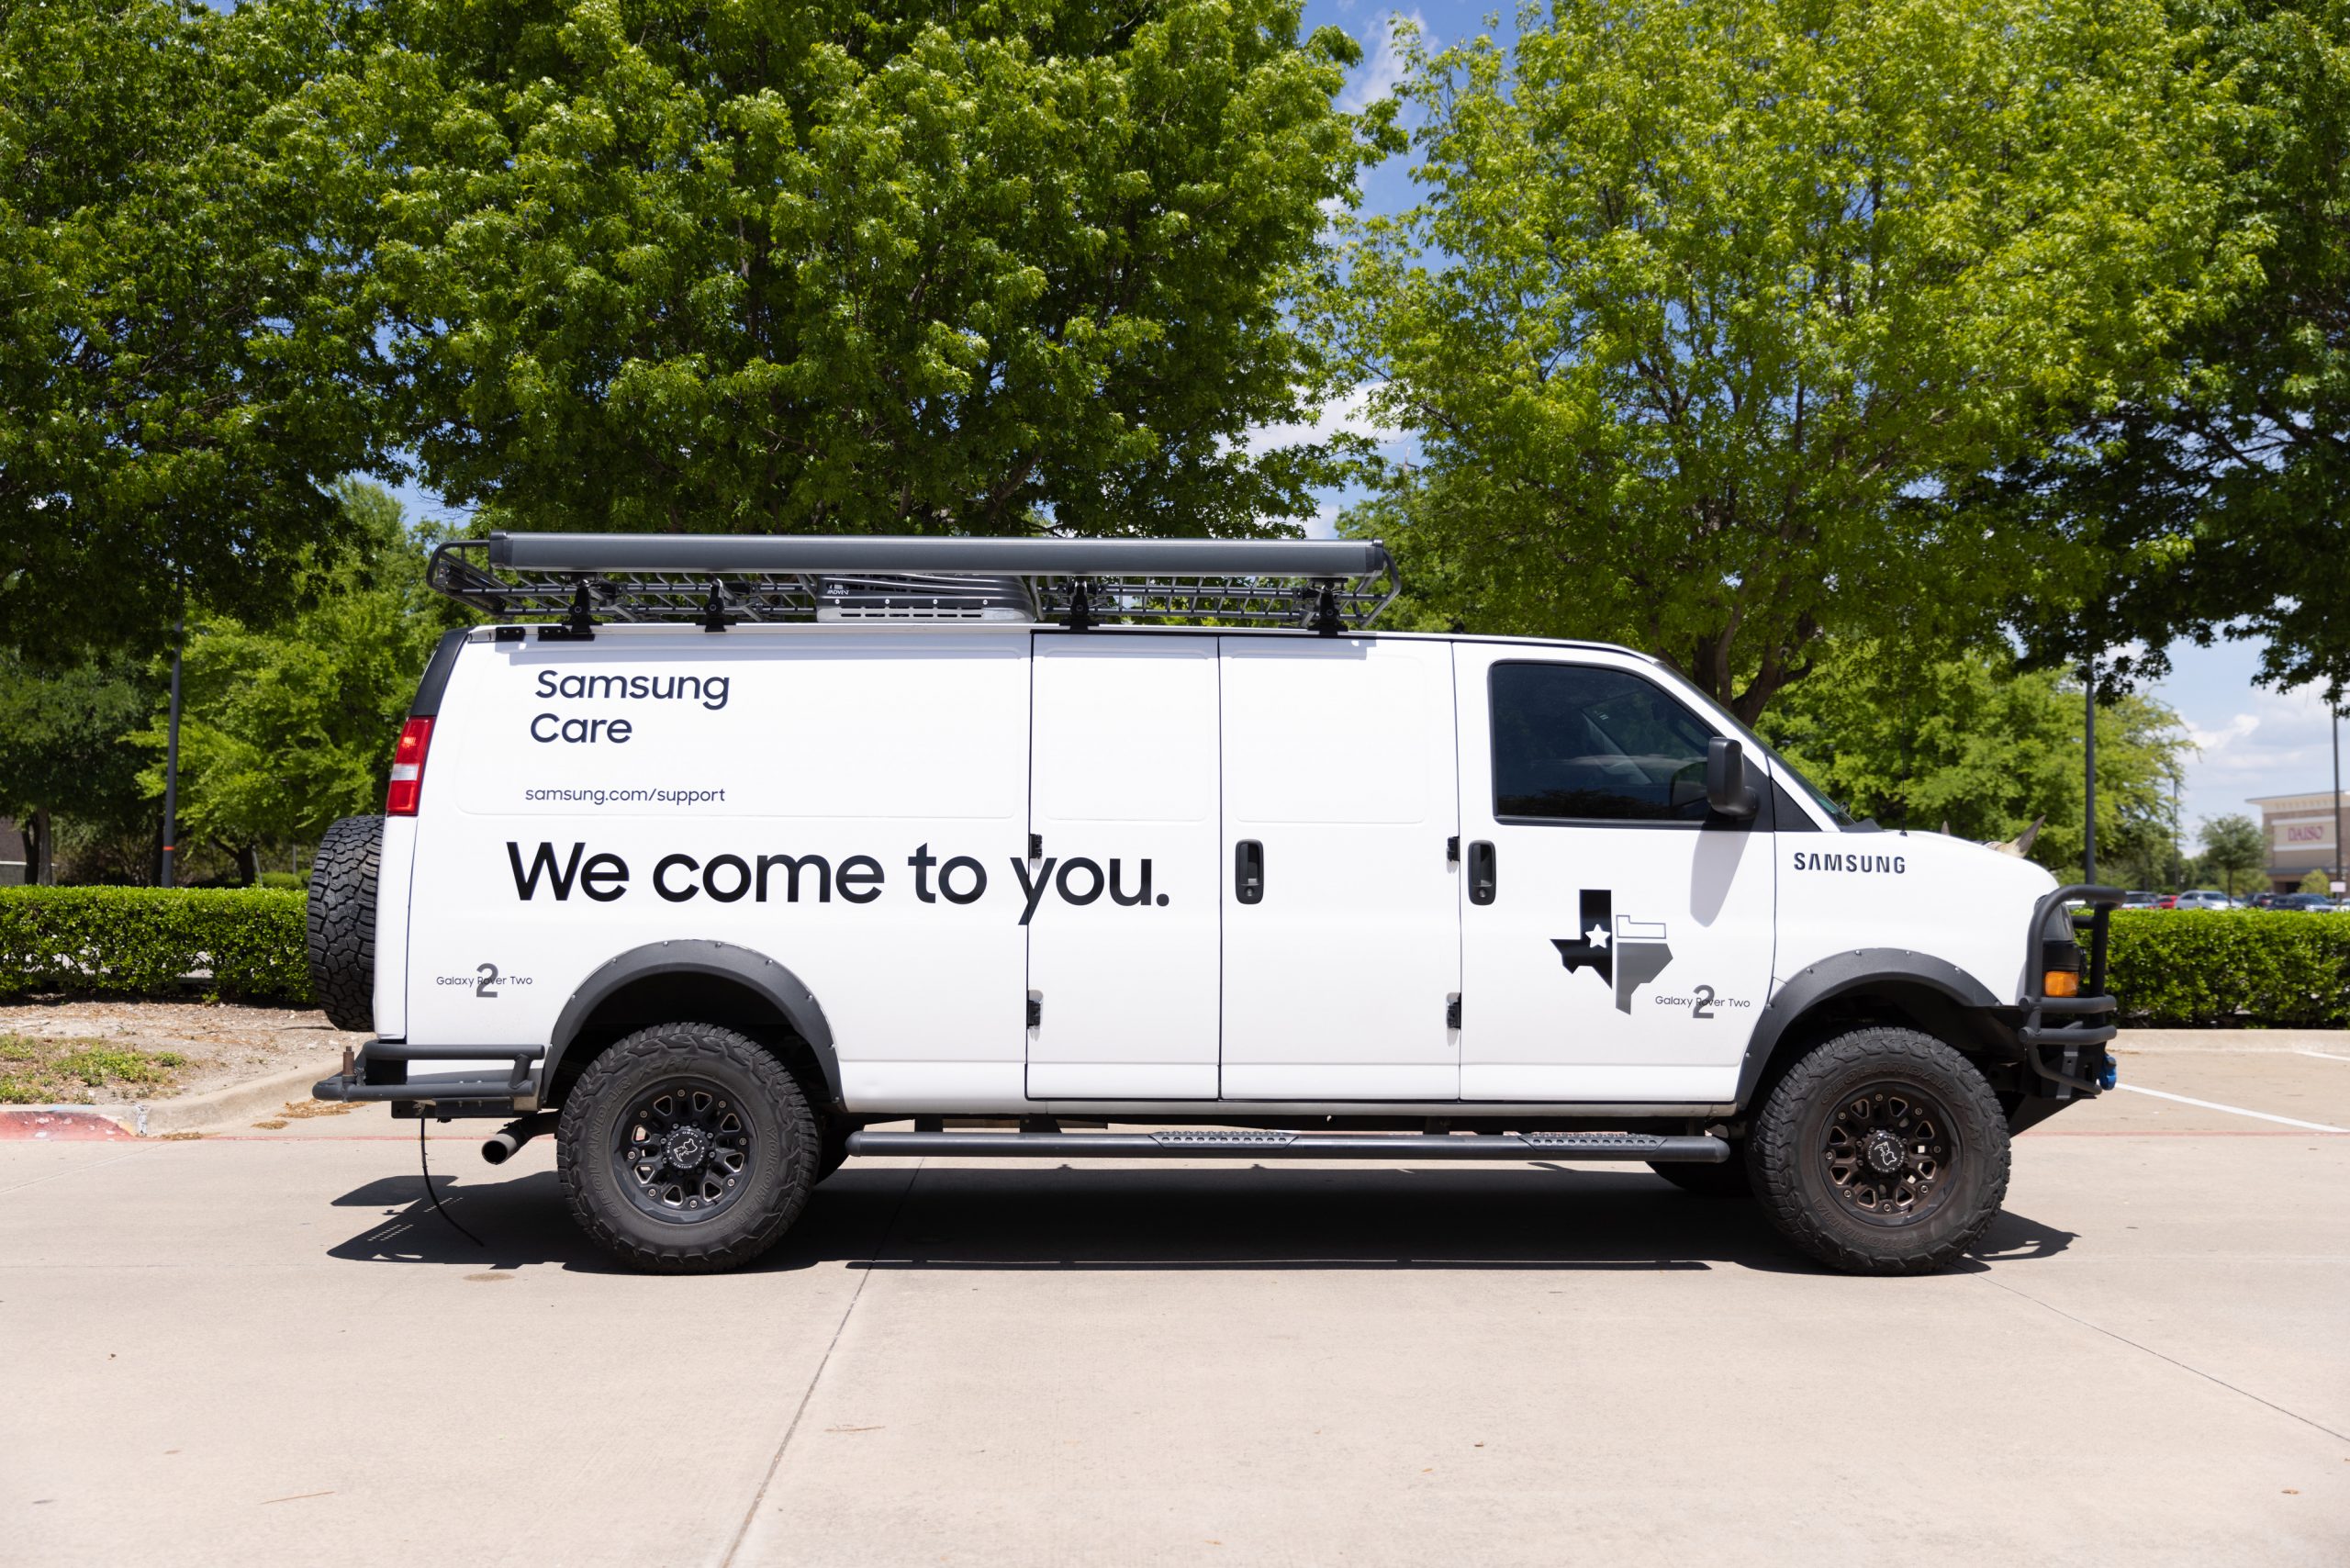 samsung-care-we-come-to-you-van